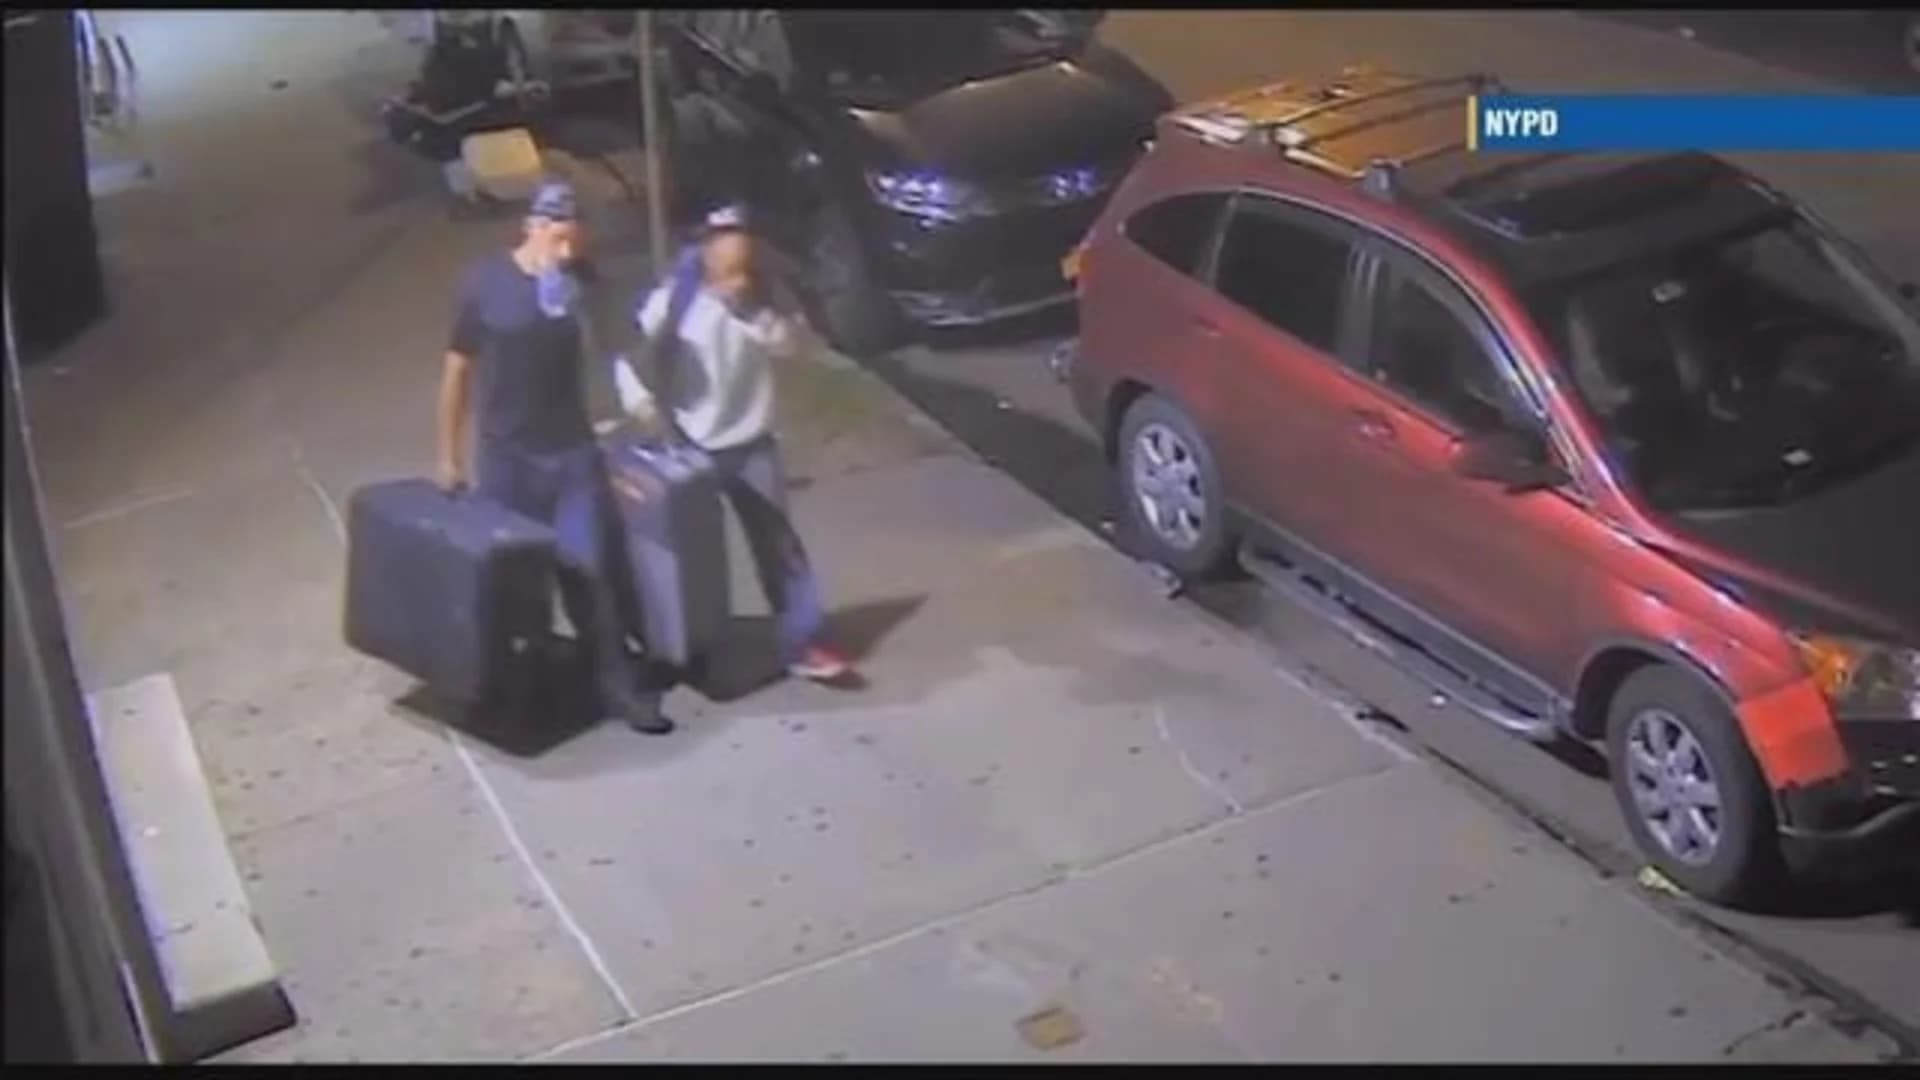 Police: 2 men stole tools from Morris Heights construction site